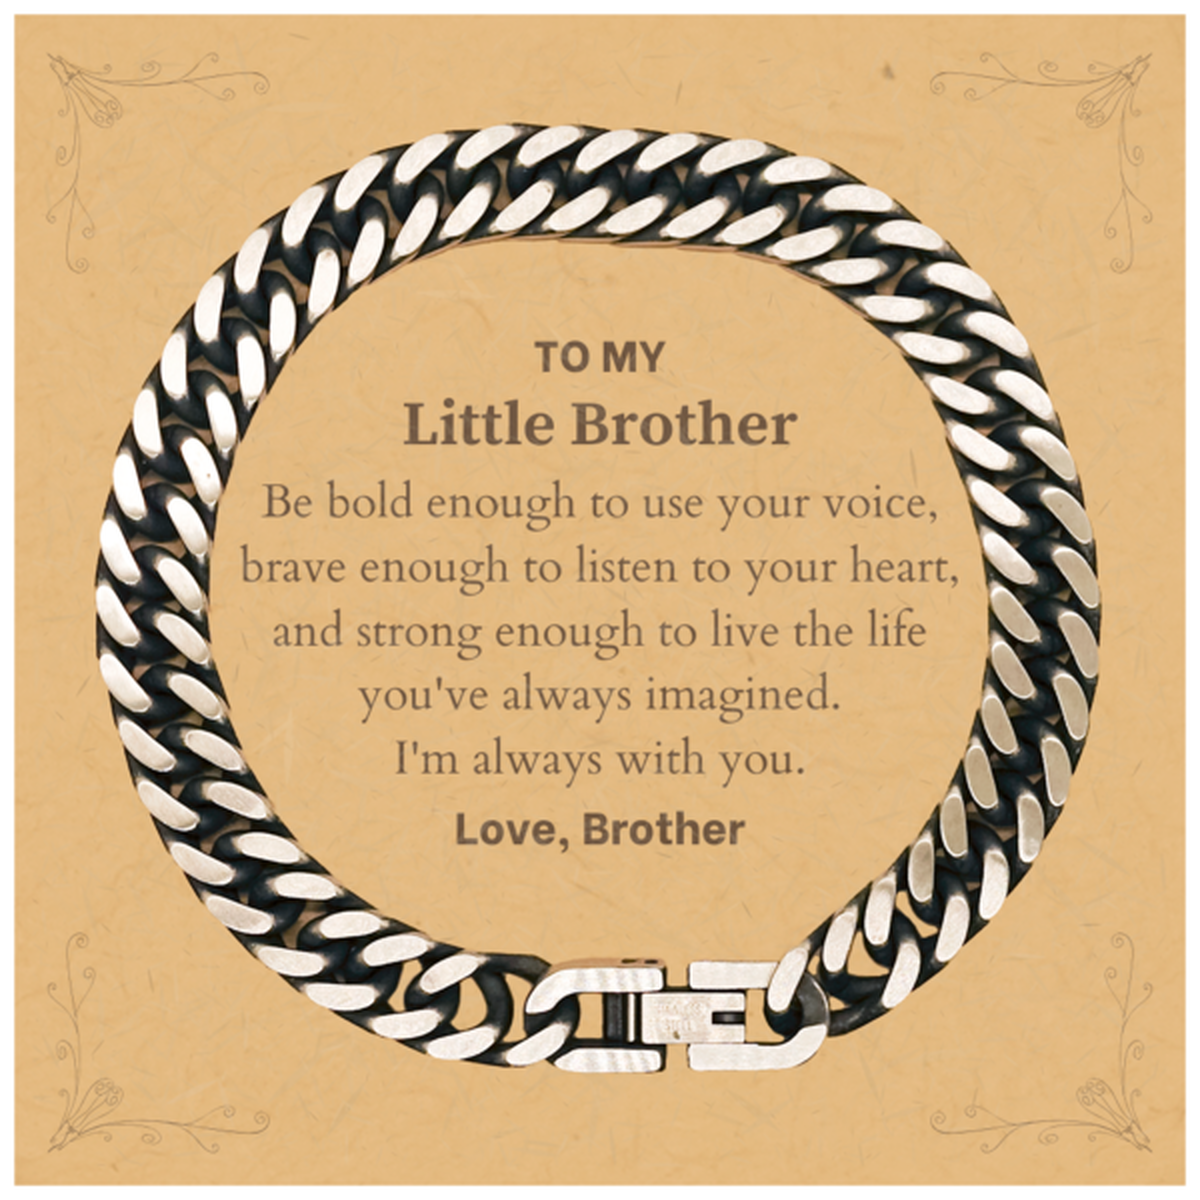 Keepsake Little Brother Cuban Link Chain Bracelet Gift Idea Graduation Christmas Birthday Little Brother from Brother, Little Brother Be bold enough to use your voice, brave enough to listen to your heart. Love, Brother